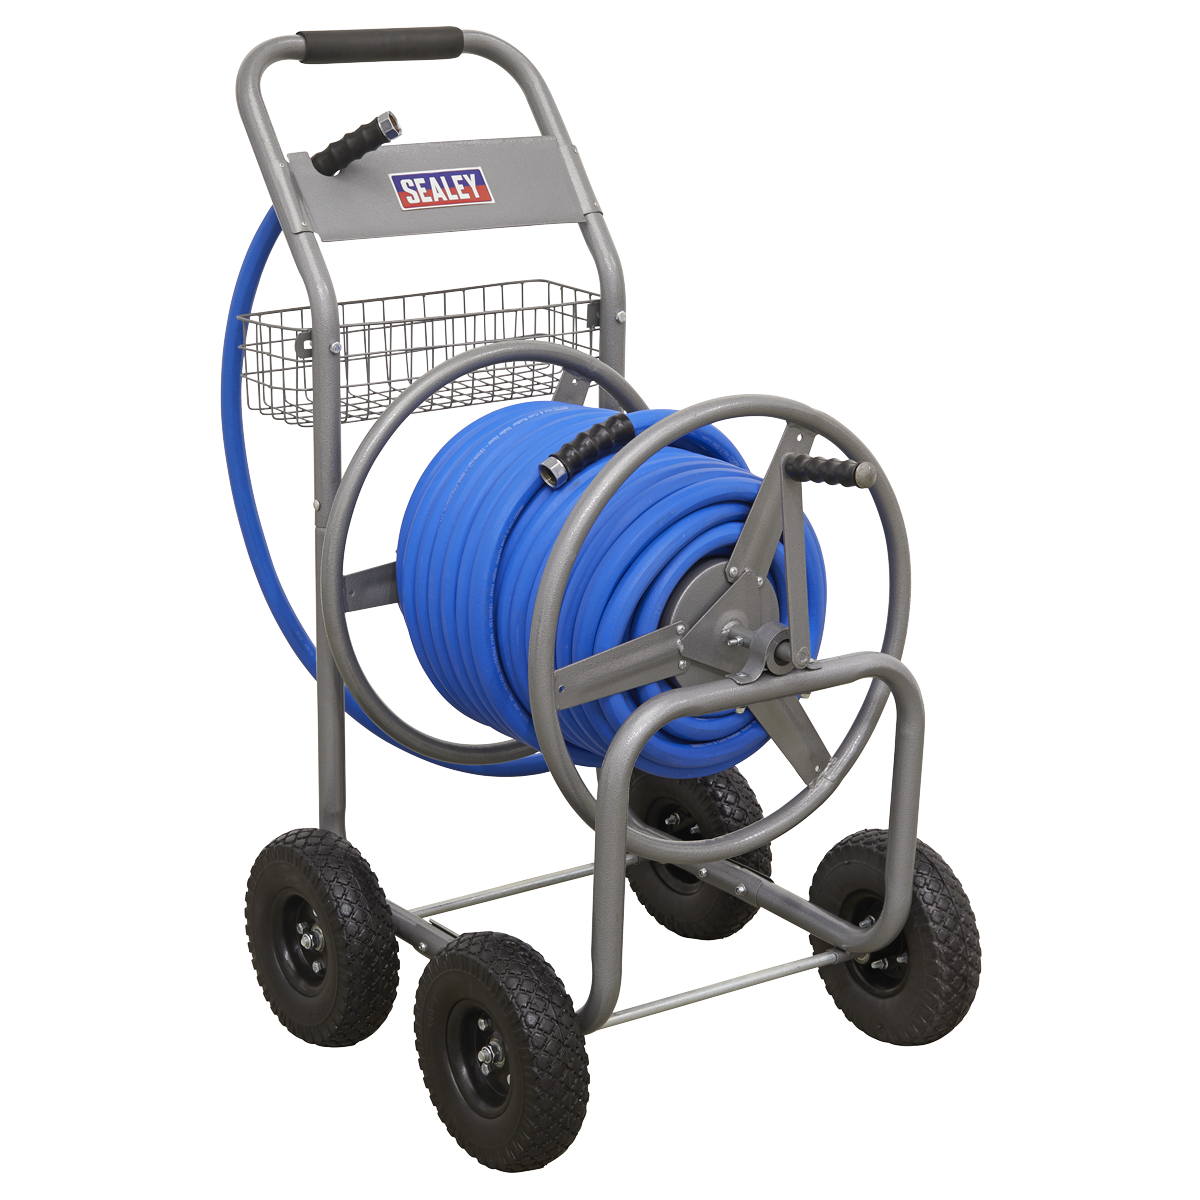 Sealey HRKIT50 Heavy-Duty Hose Reel Cart with 50m Heavy-Duty ø19mm Hot &  Cold Rubber Water Hose from Lawson HIS